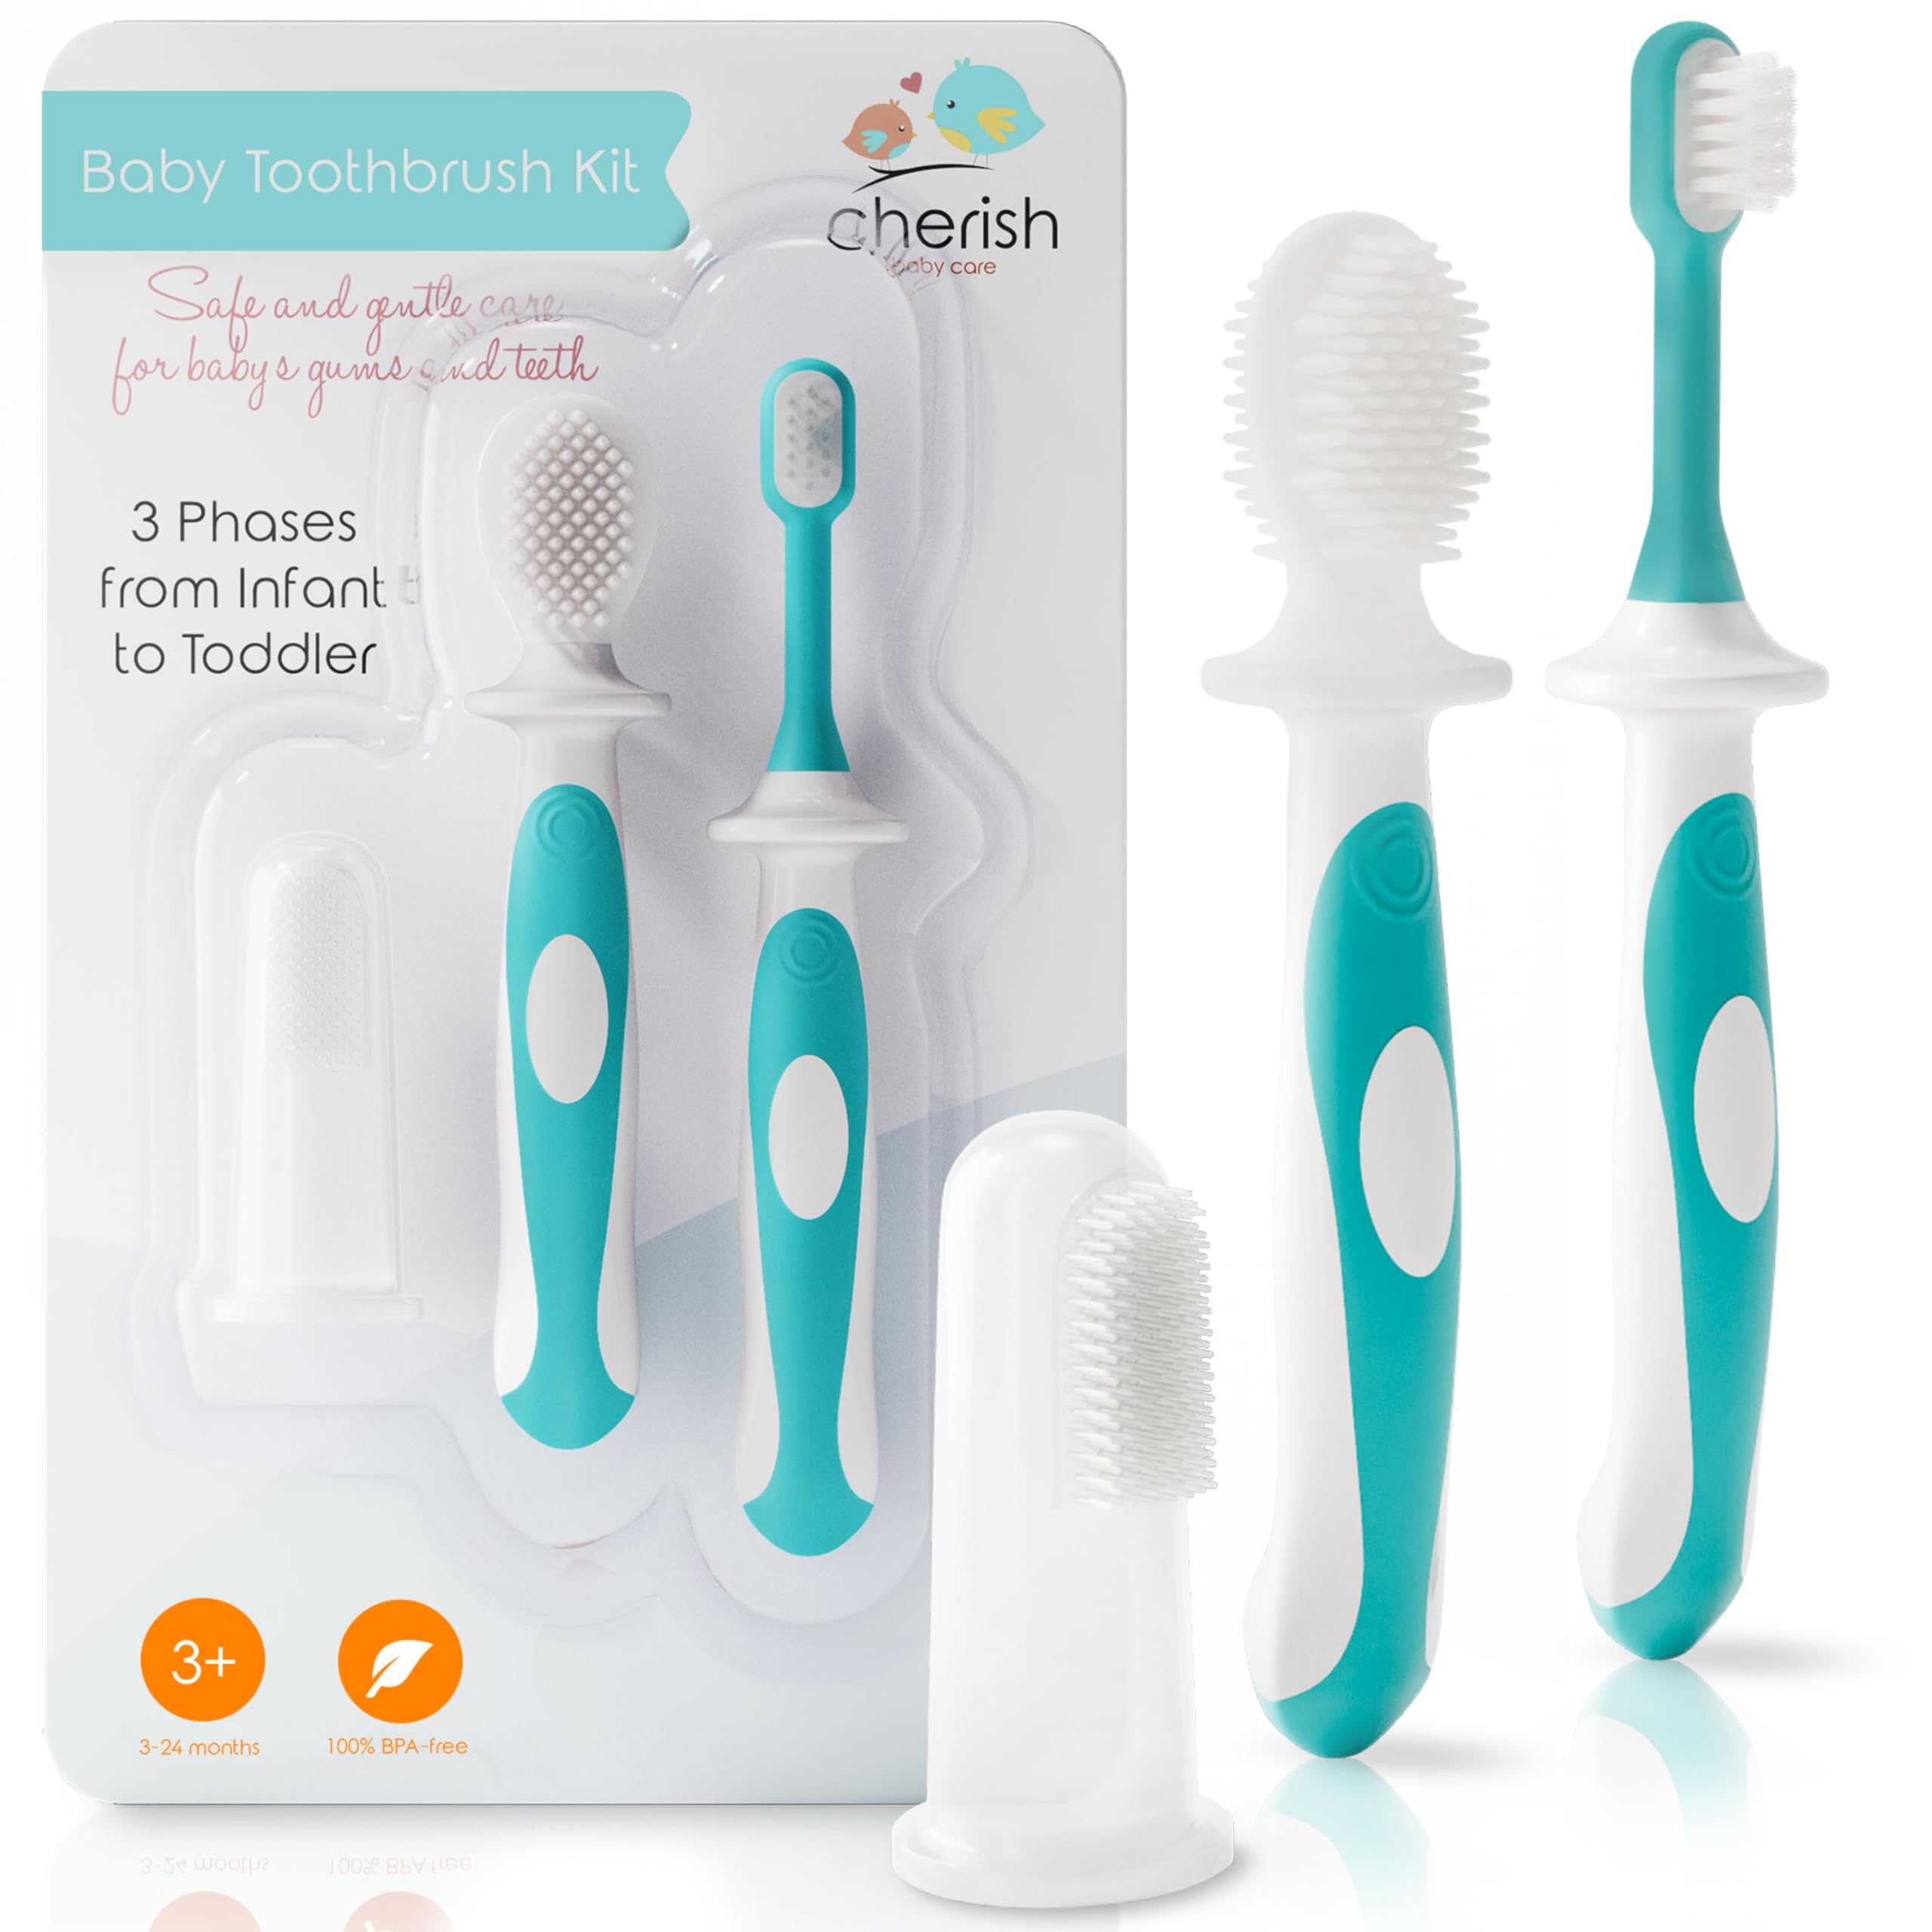 Cherish Baby Care Baby Toothbrush Set (3-24 Months) - BPA-Free Baby Finger Toothbrush, Training Toothbrush & Toddler Toothbrush - Designed in cana